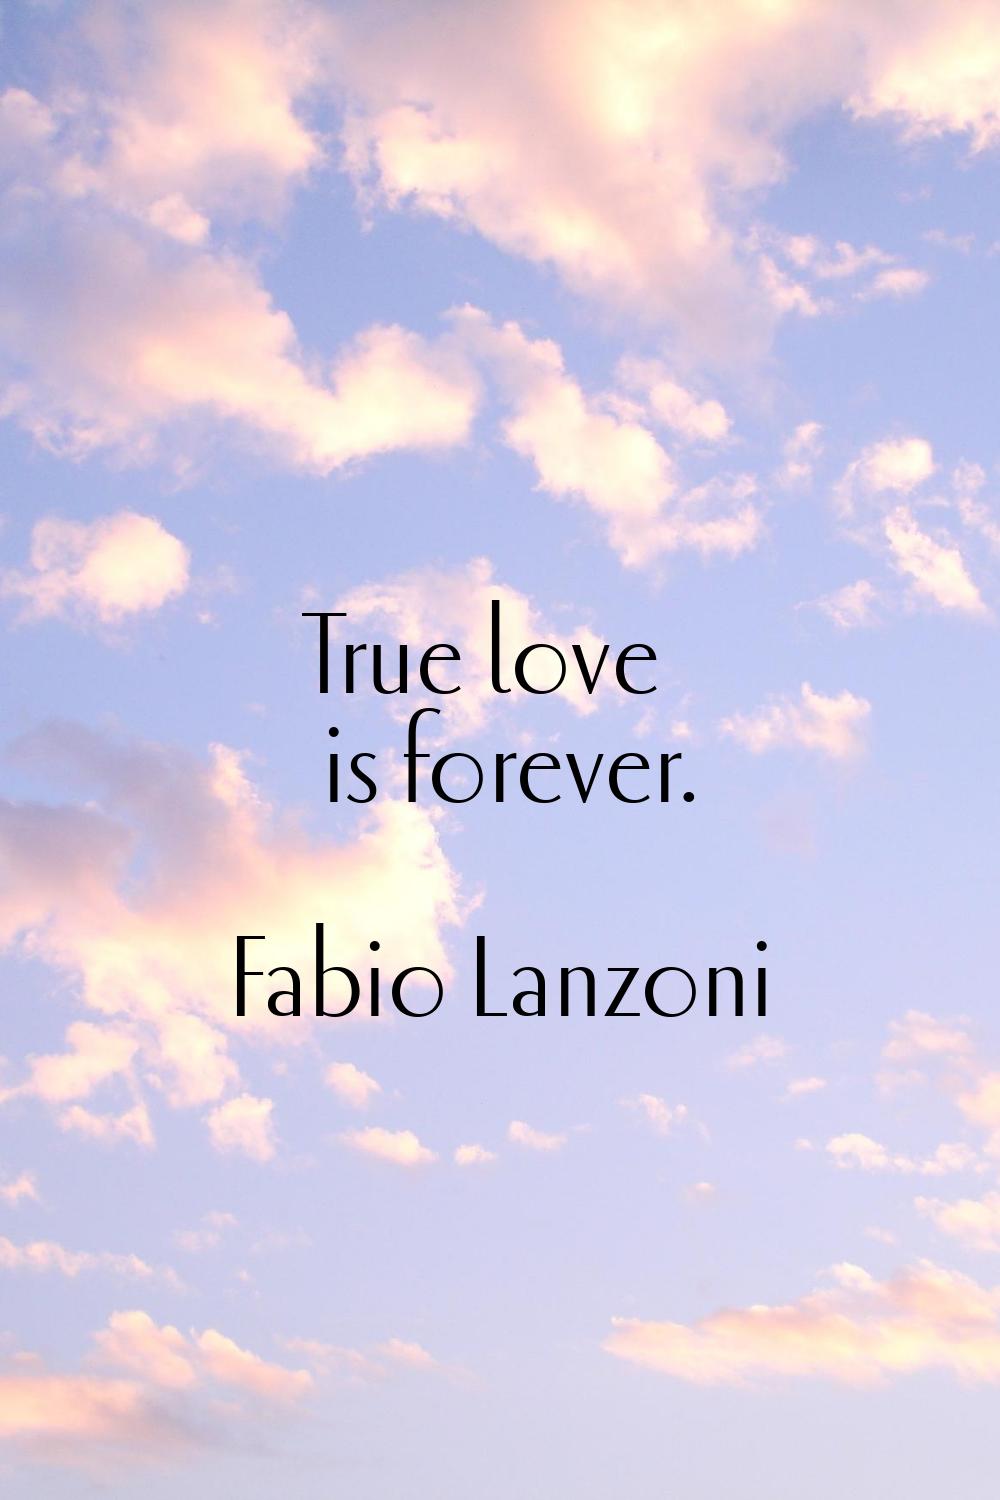 True love is forever.